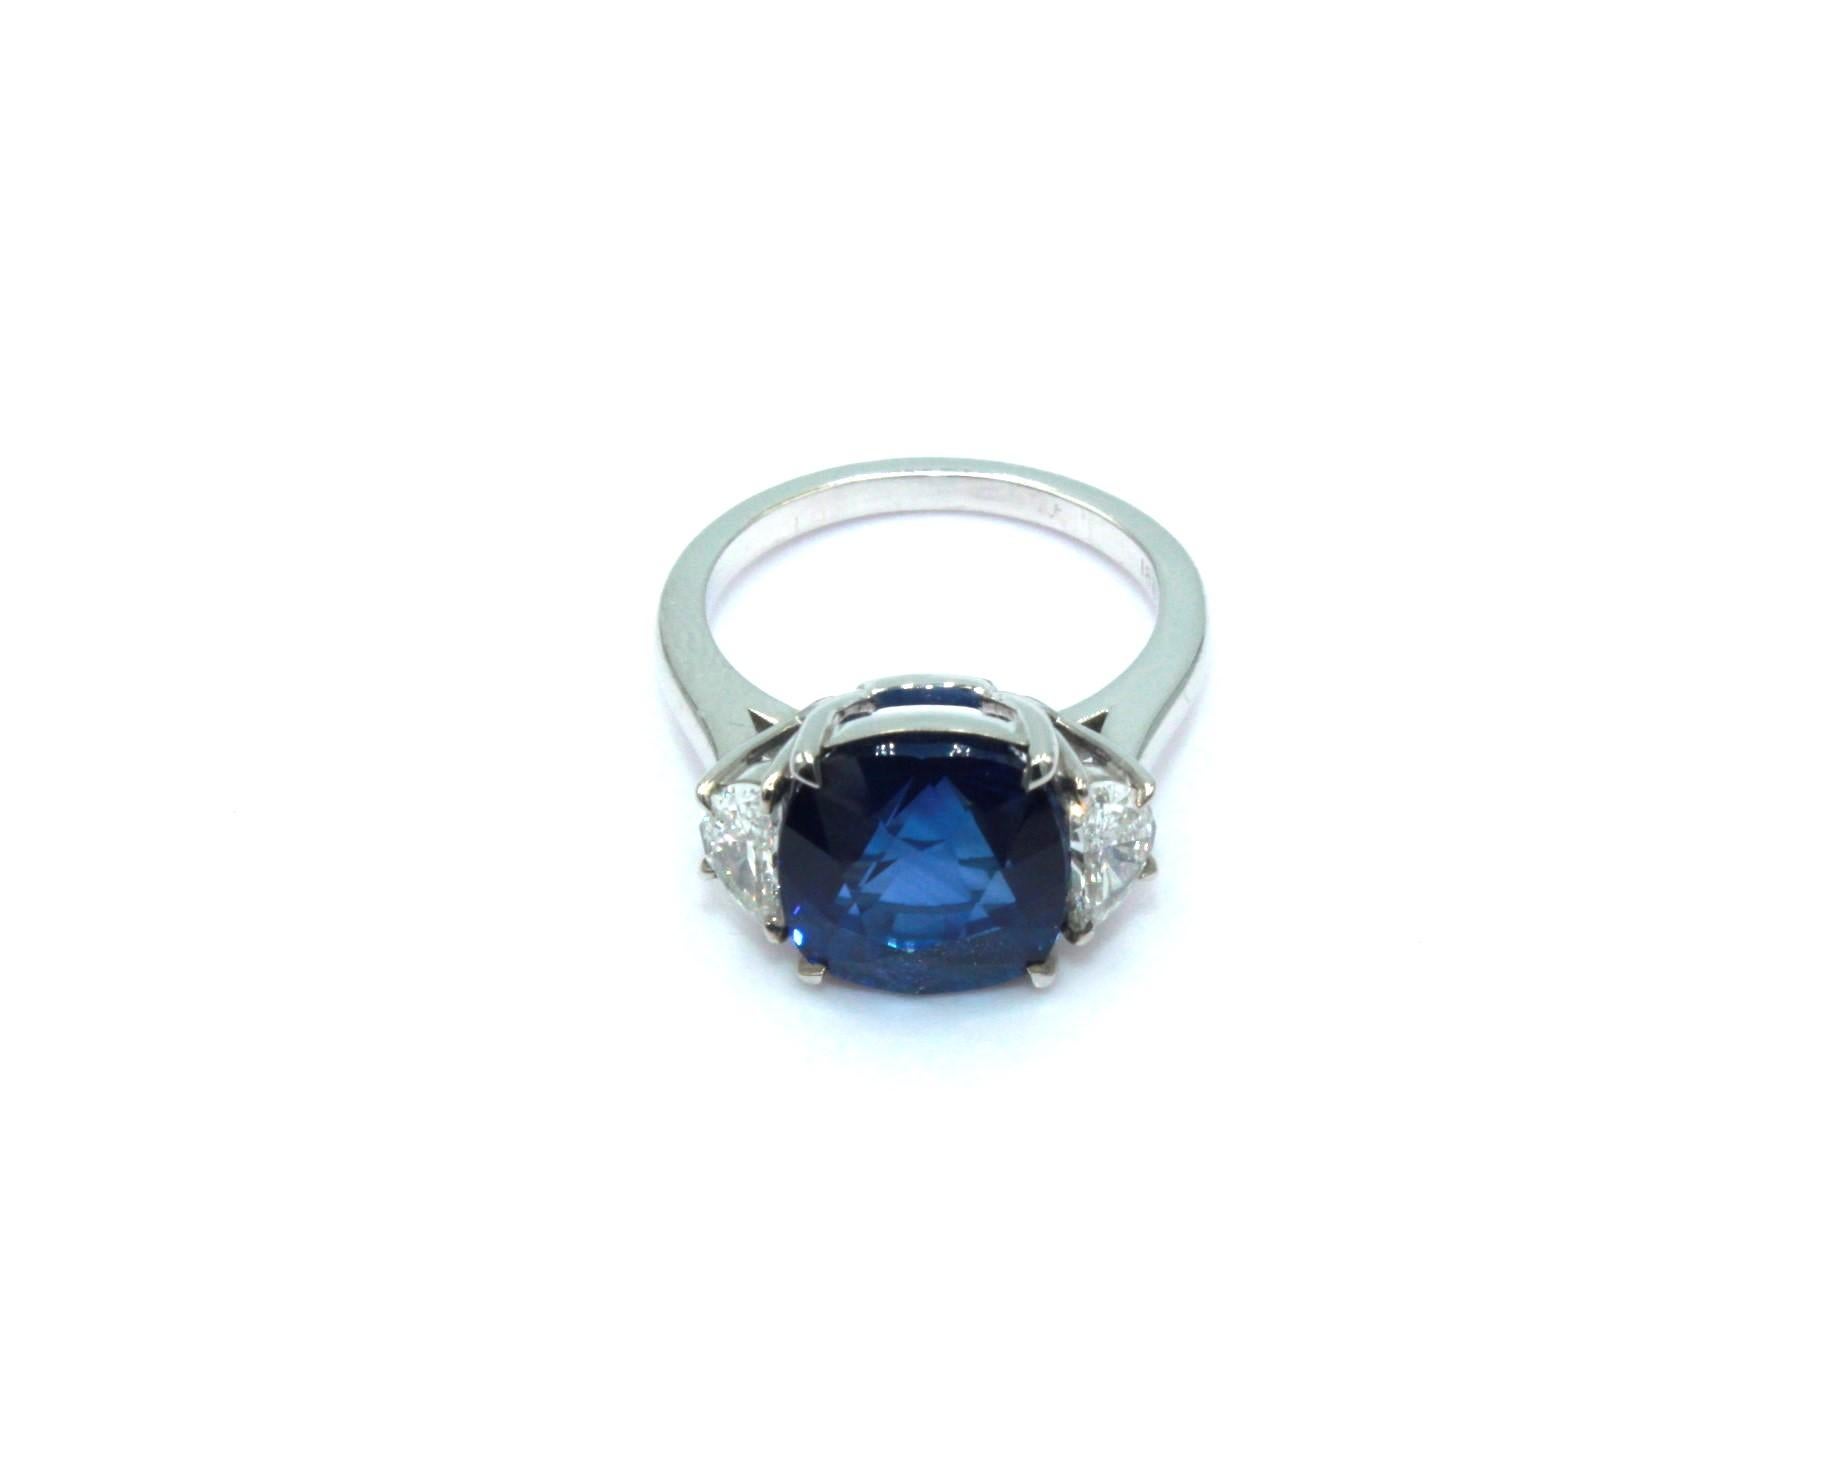 8.0 carats cushion Ceylon Sapphire, sided with 2 half-moon shaped diamonds, totaling a diamond weight of 0.64 carats. 

This stunning Sapphire Diamond Ring will highlight your elegance and uniqueness. 

Item Details:
- Type: Ring
- Metal: 18K Gold
-